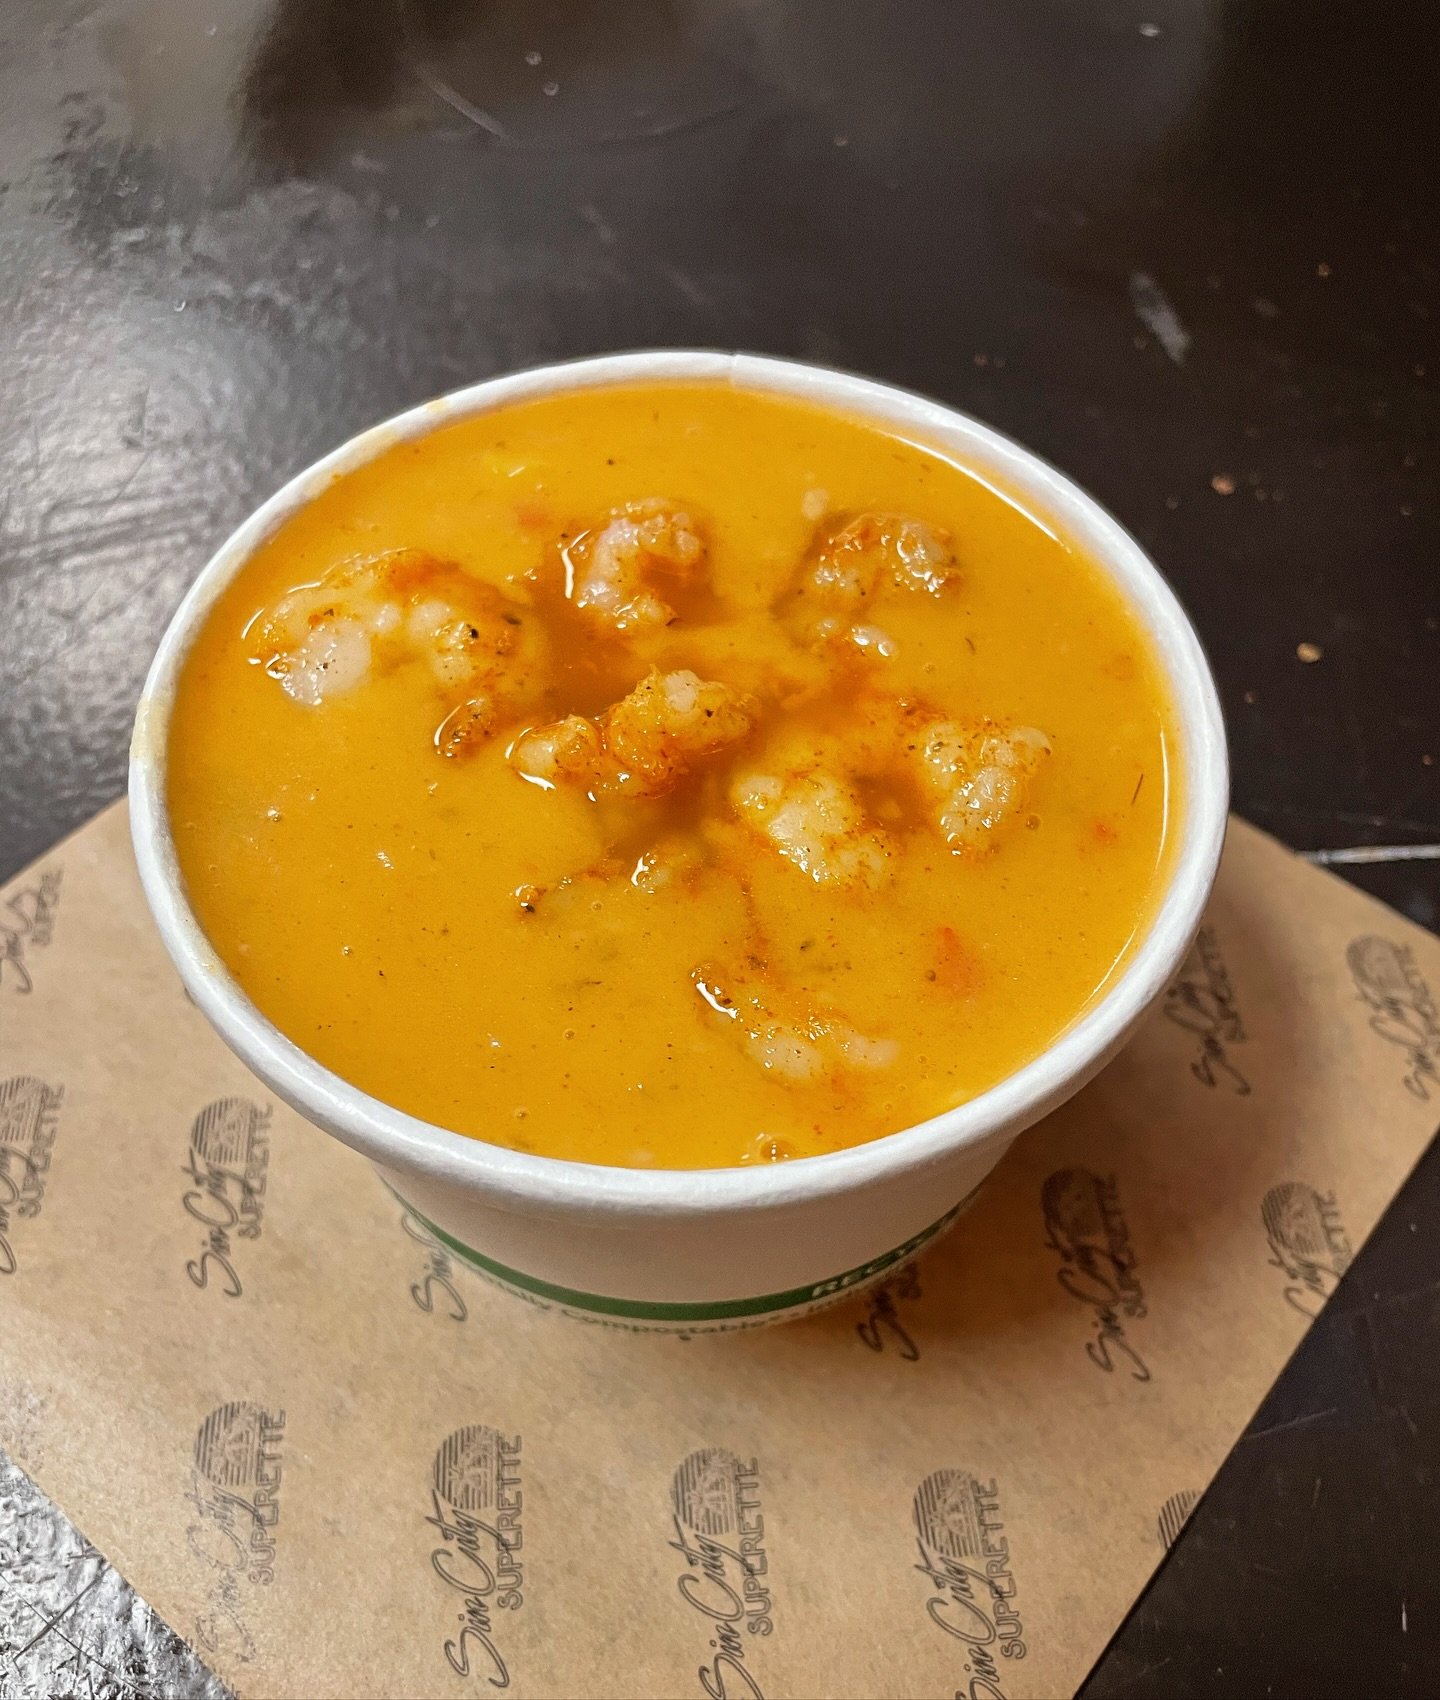 Looking for your crawfish fix? We have Louisiana Crawfish + Corn Chowder available today and tomorrow! 🦞🌽🍜

Come warm up with a delicious treat, order online or find us on Uber Eats 😎